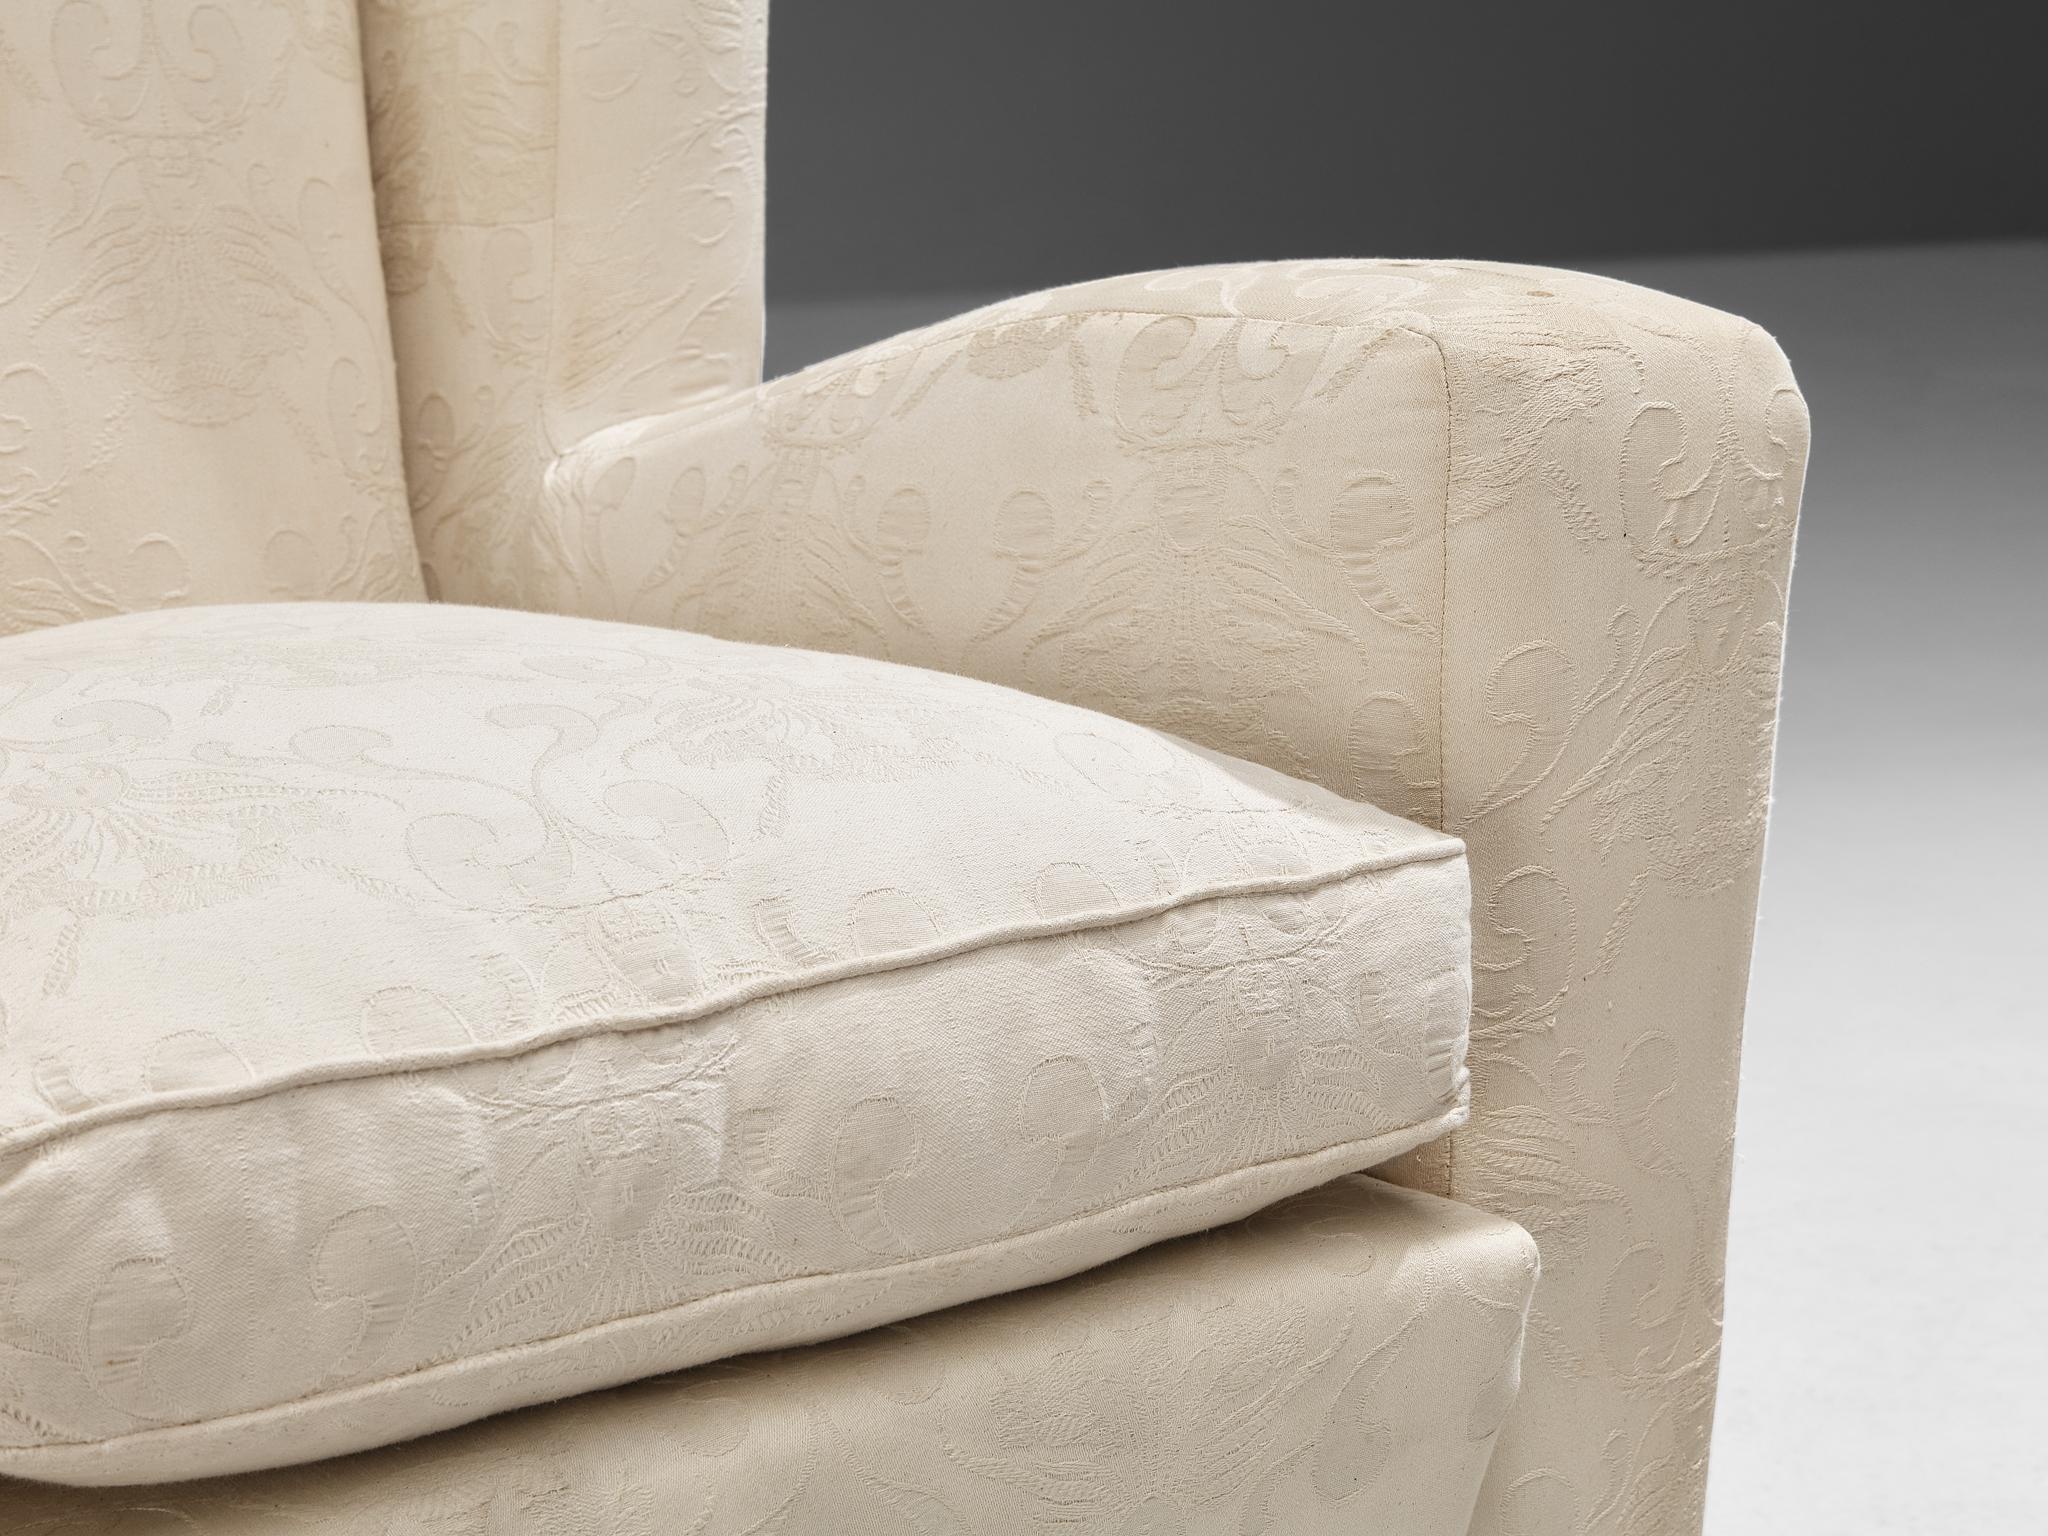 Mid-20th Century Italian Pair of Wingback Chairs in Off-White Upholstery For Sale